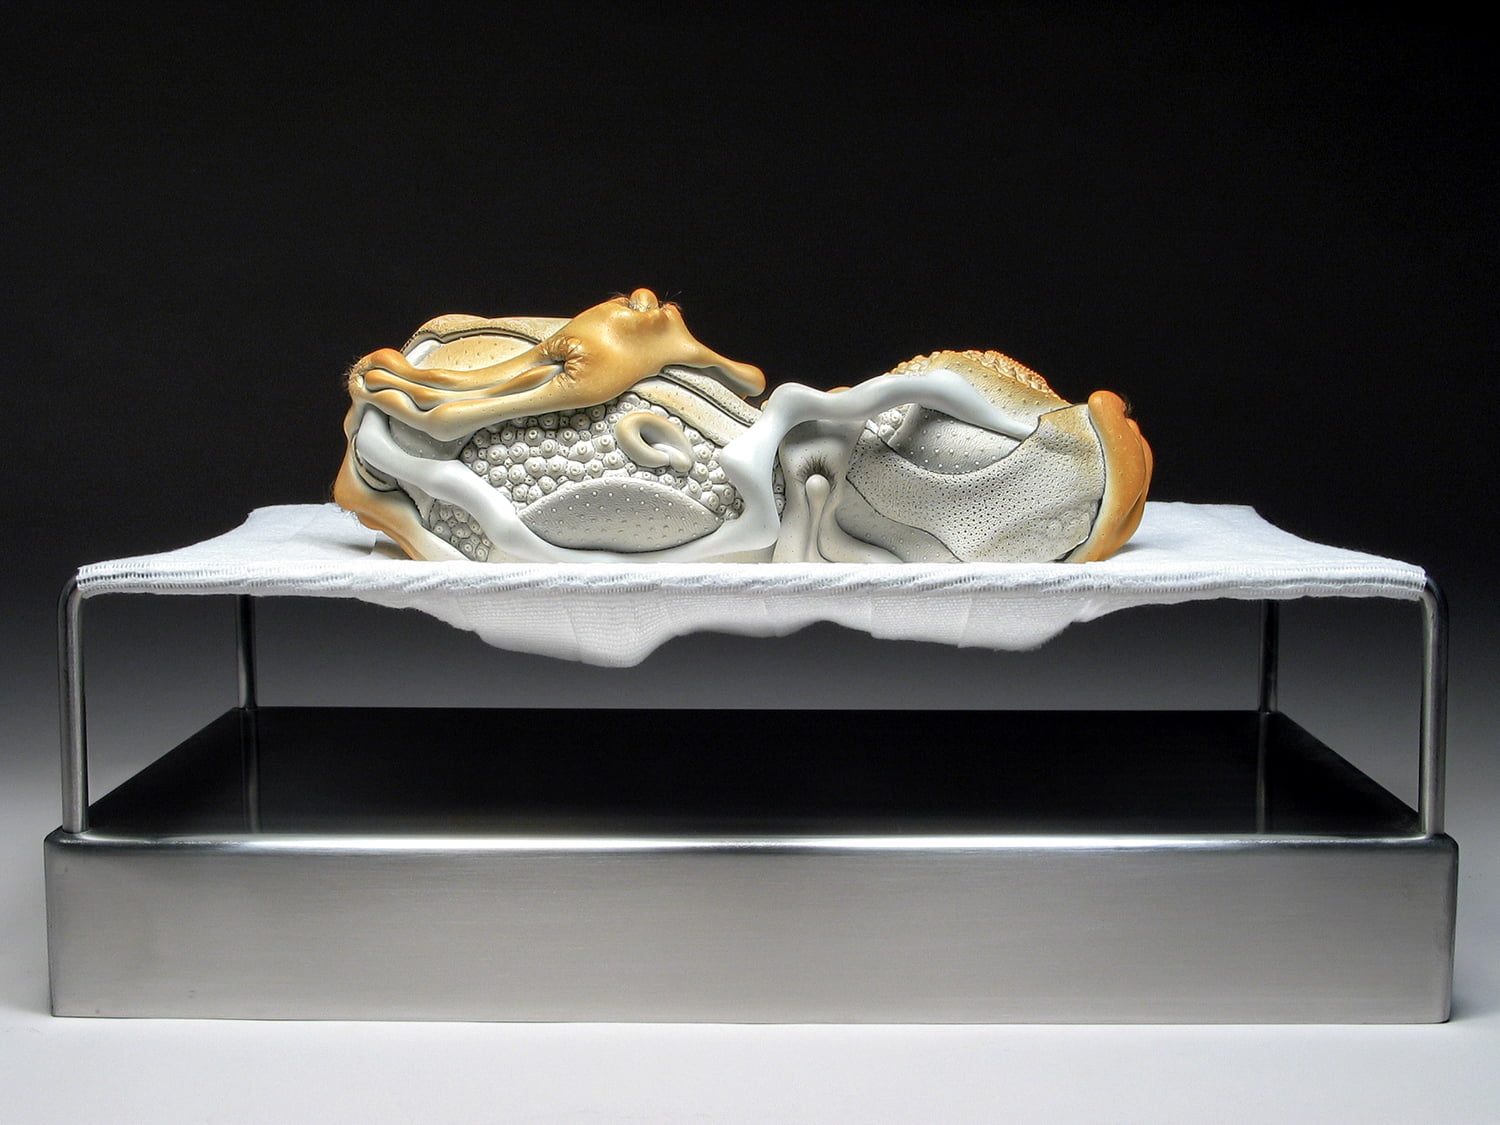 Jason Briggs "Rest" (full view). Porcelain, hair, and mixed media. Sculptural ceramic art object.